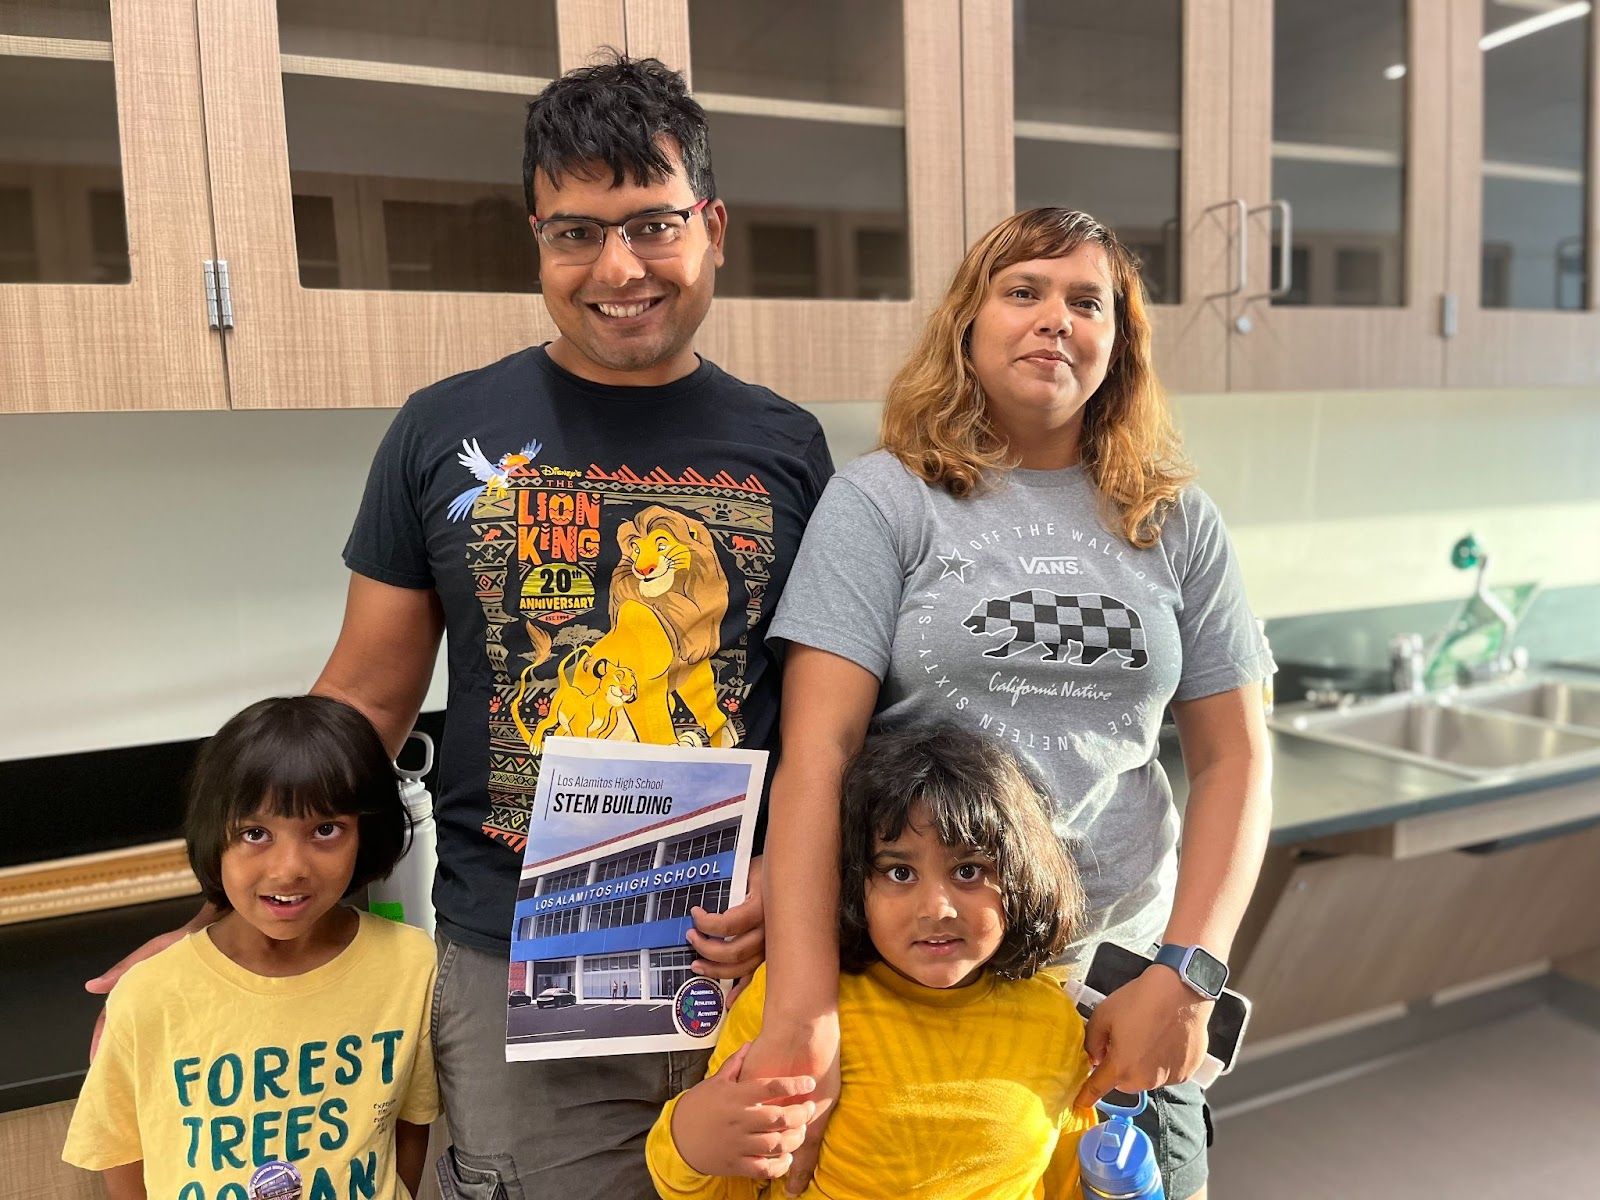 Vinod Vishwakarma, his wife Kanishka and children Shakya and Sharma tour the new STEM building at Los Alamitos High School during the Community Open House on August 24. Photo by Jeannette Andruss